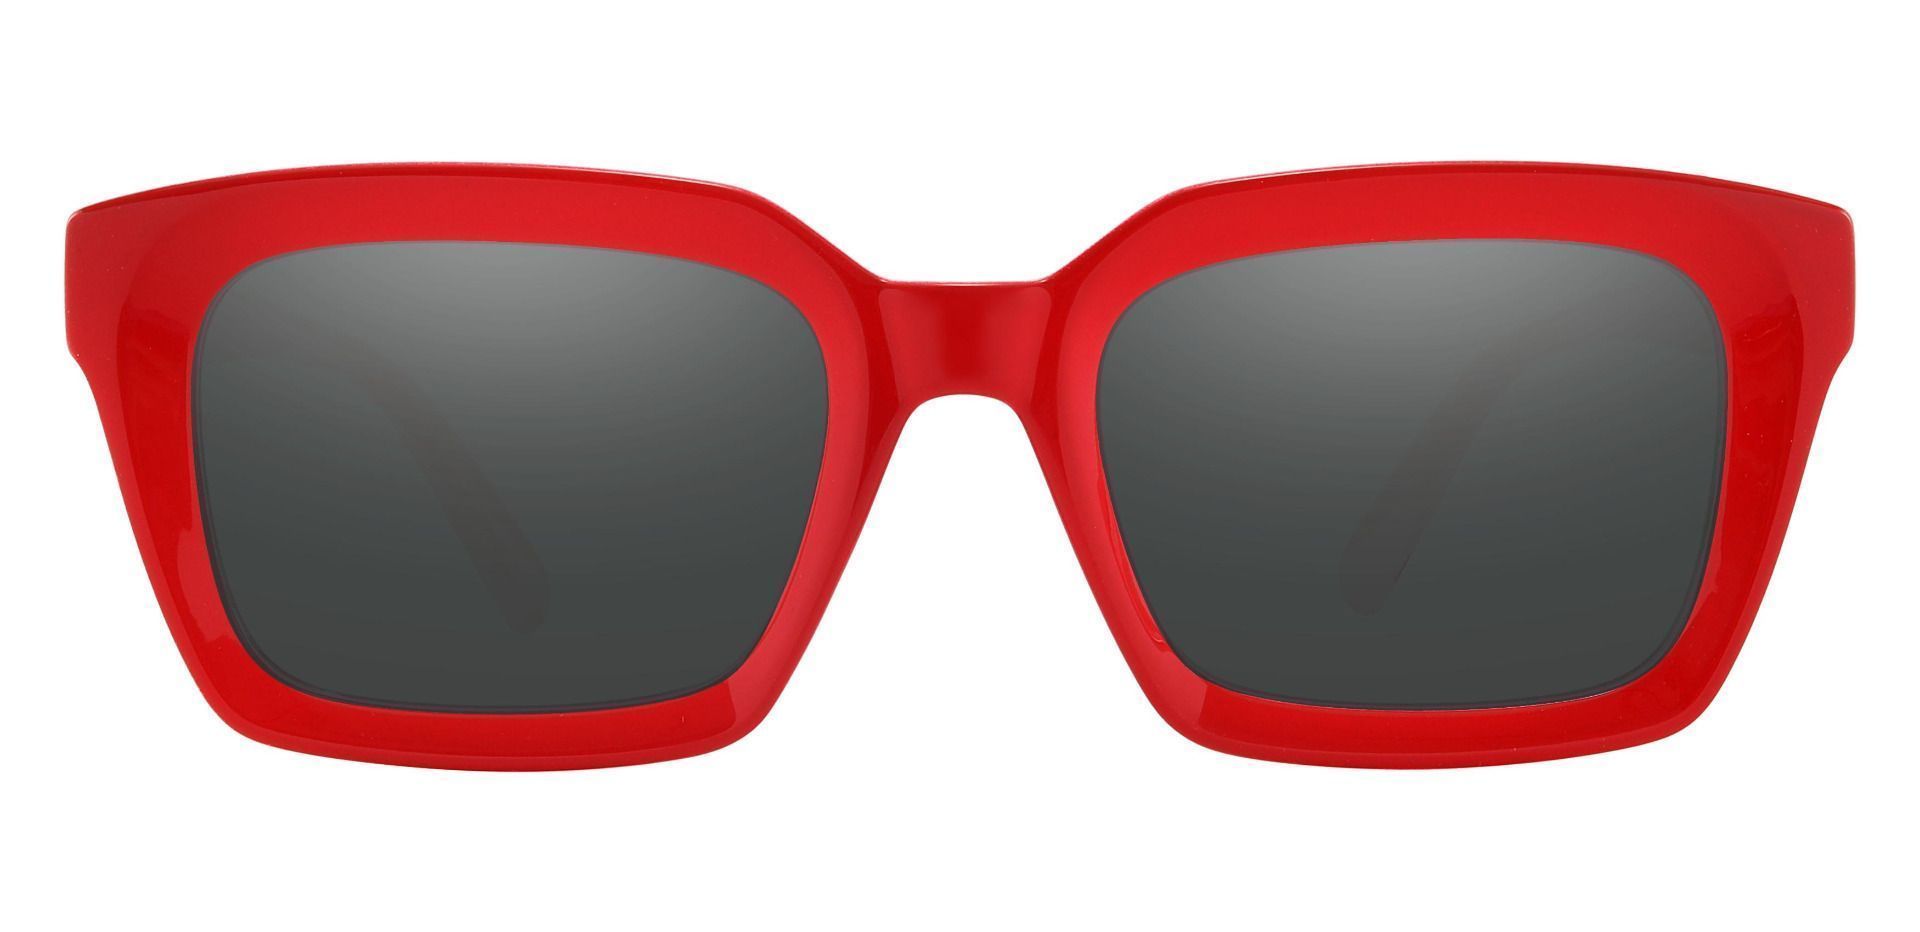 Unity Rectangle Lined Bifocal Sunglasses - Red Frame With Gray Lenses